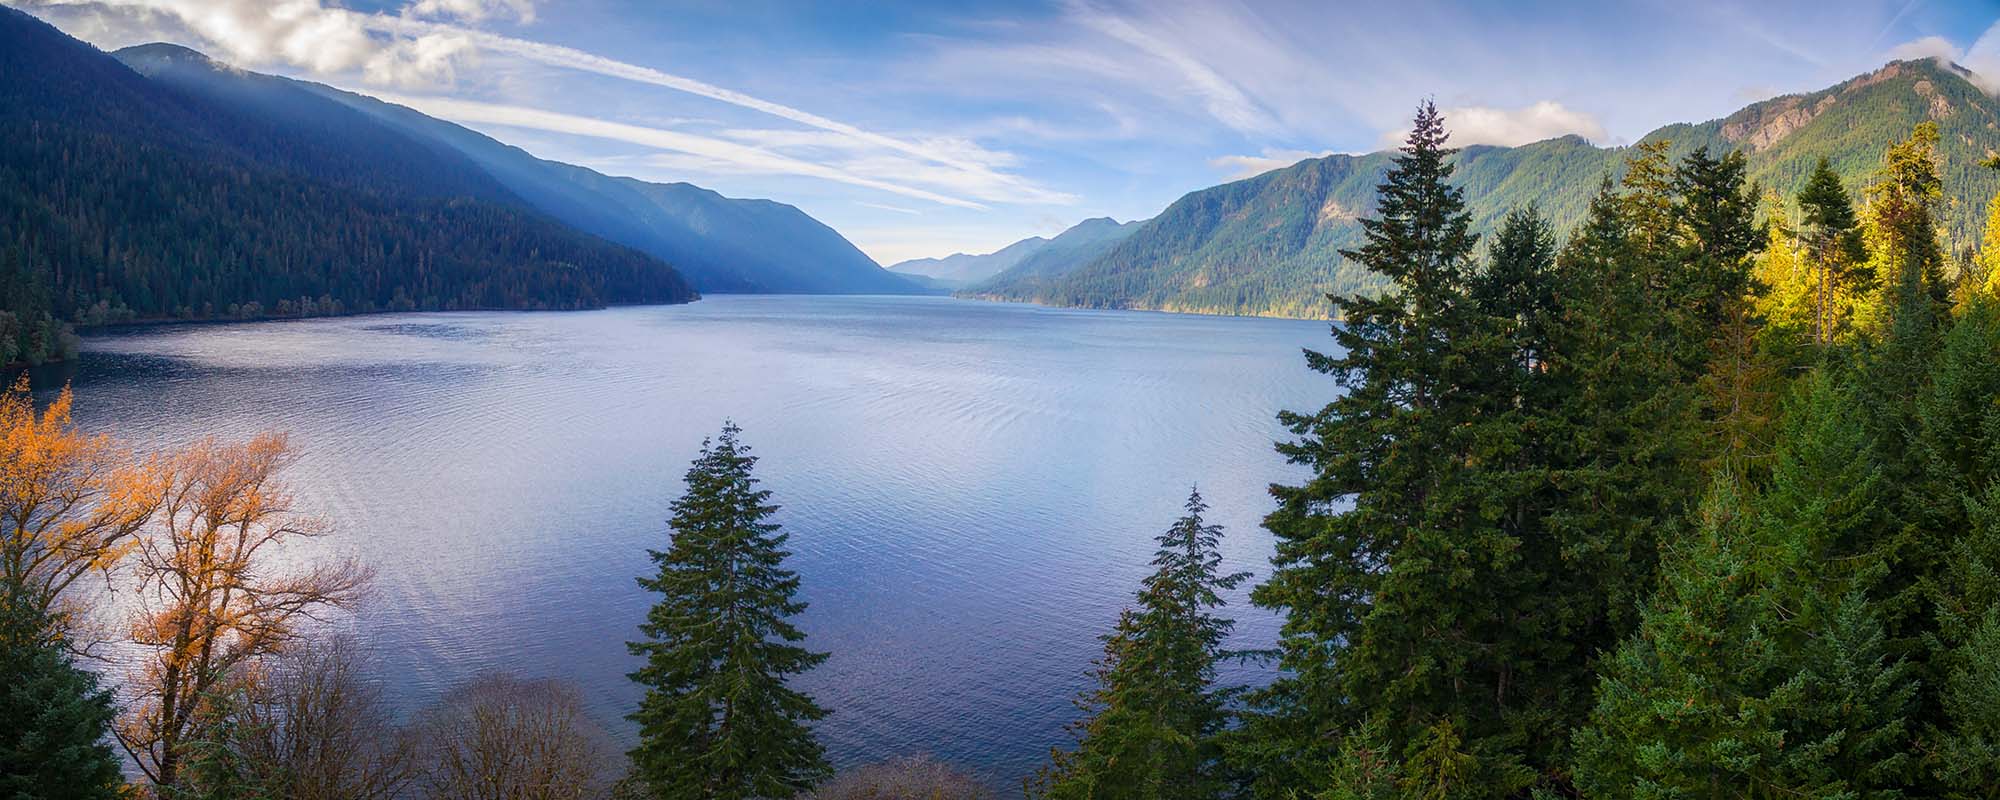 Lake Crescent at Olympic National Park